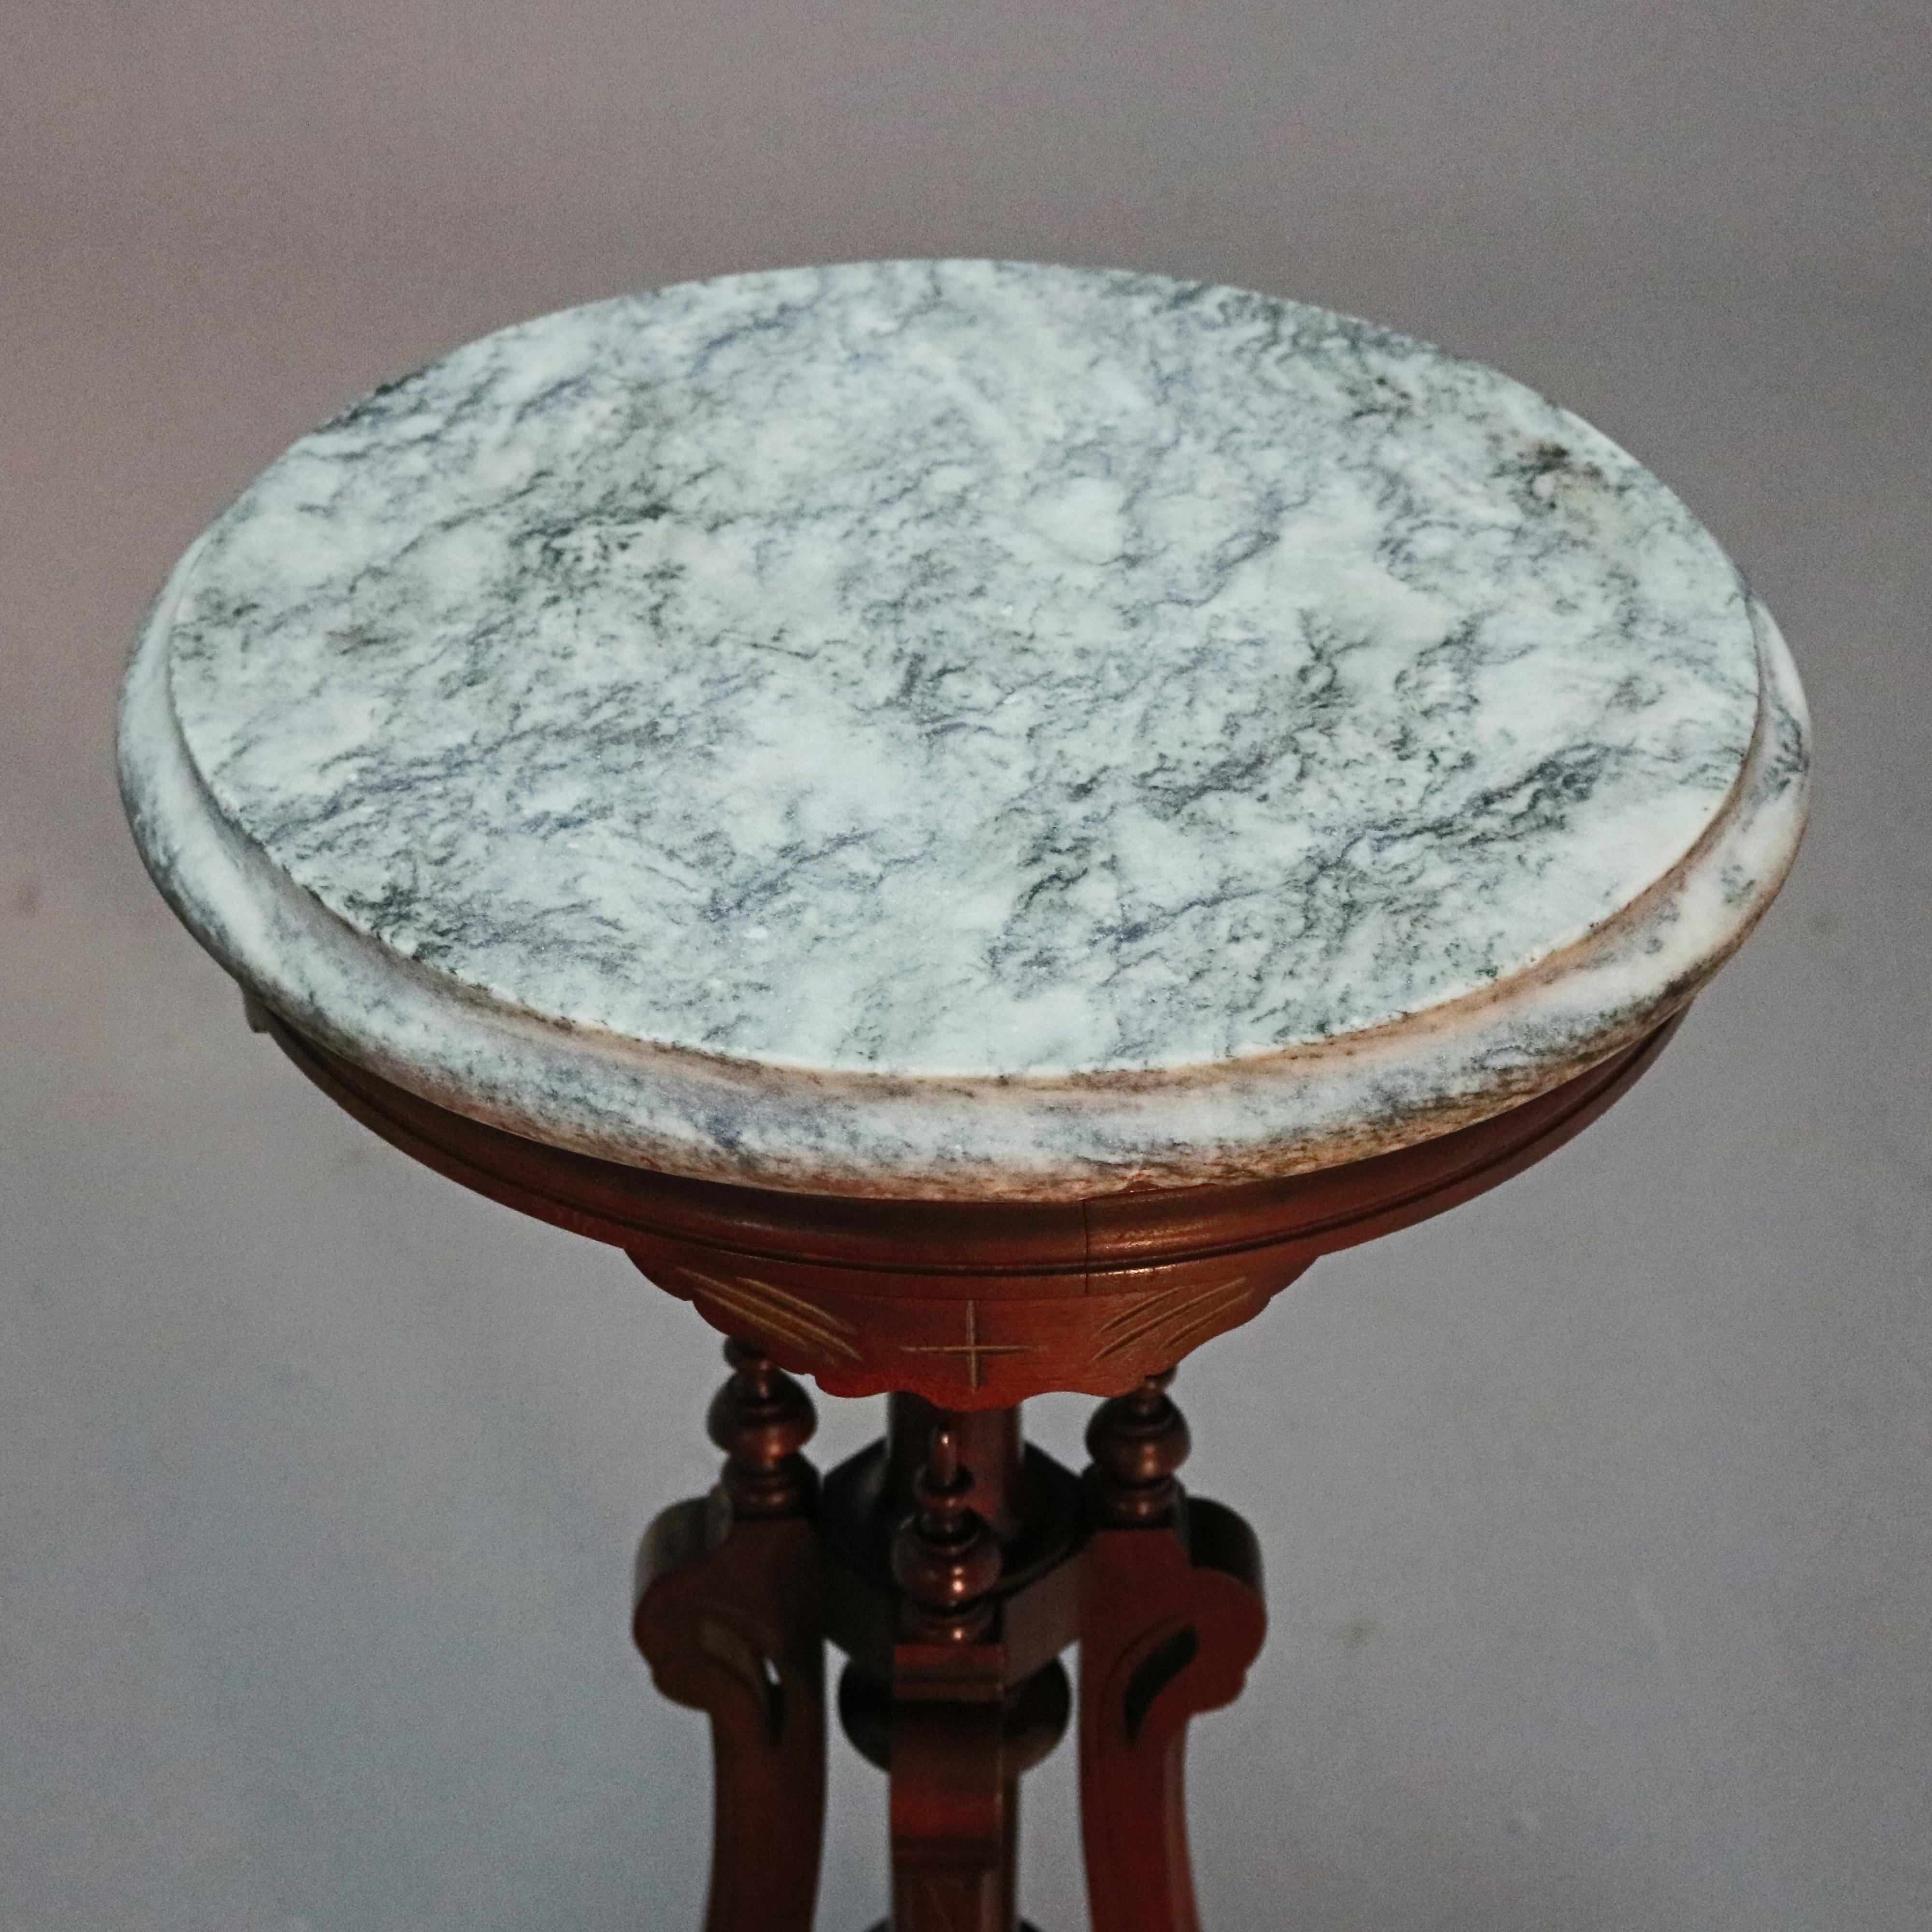 Beveled Antique Renaissance Revival Carved Walnut Marble Top Fern Stand, circa 1890